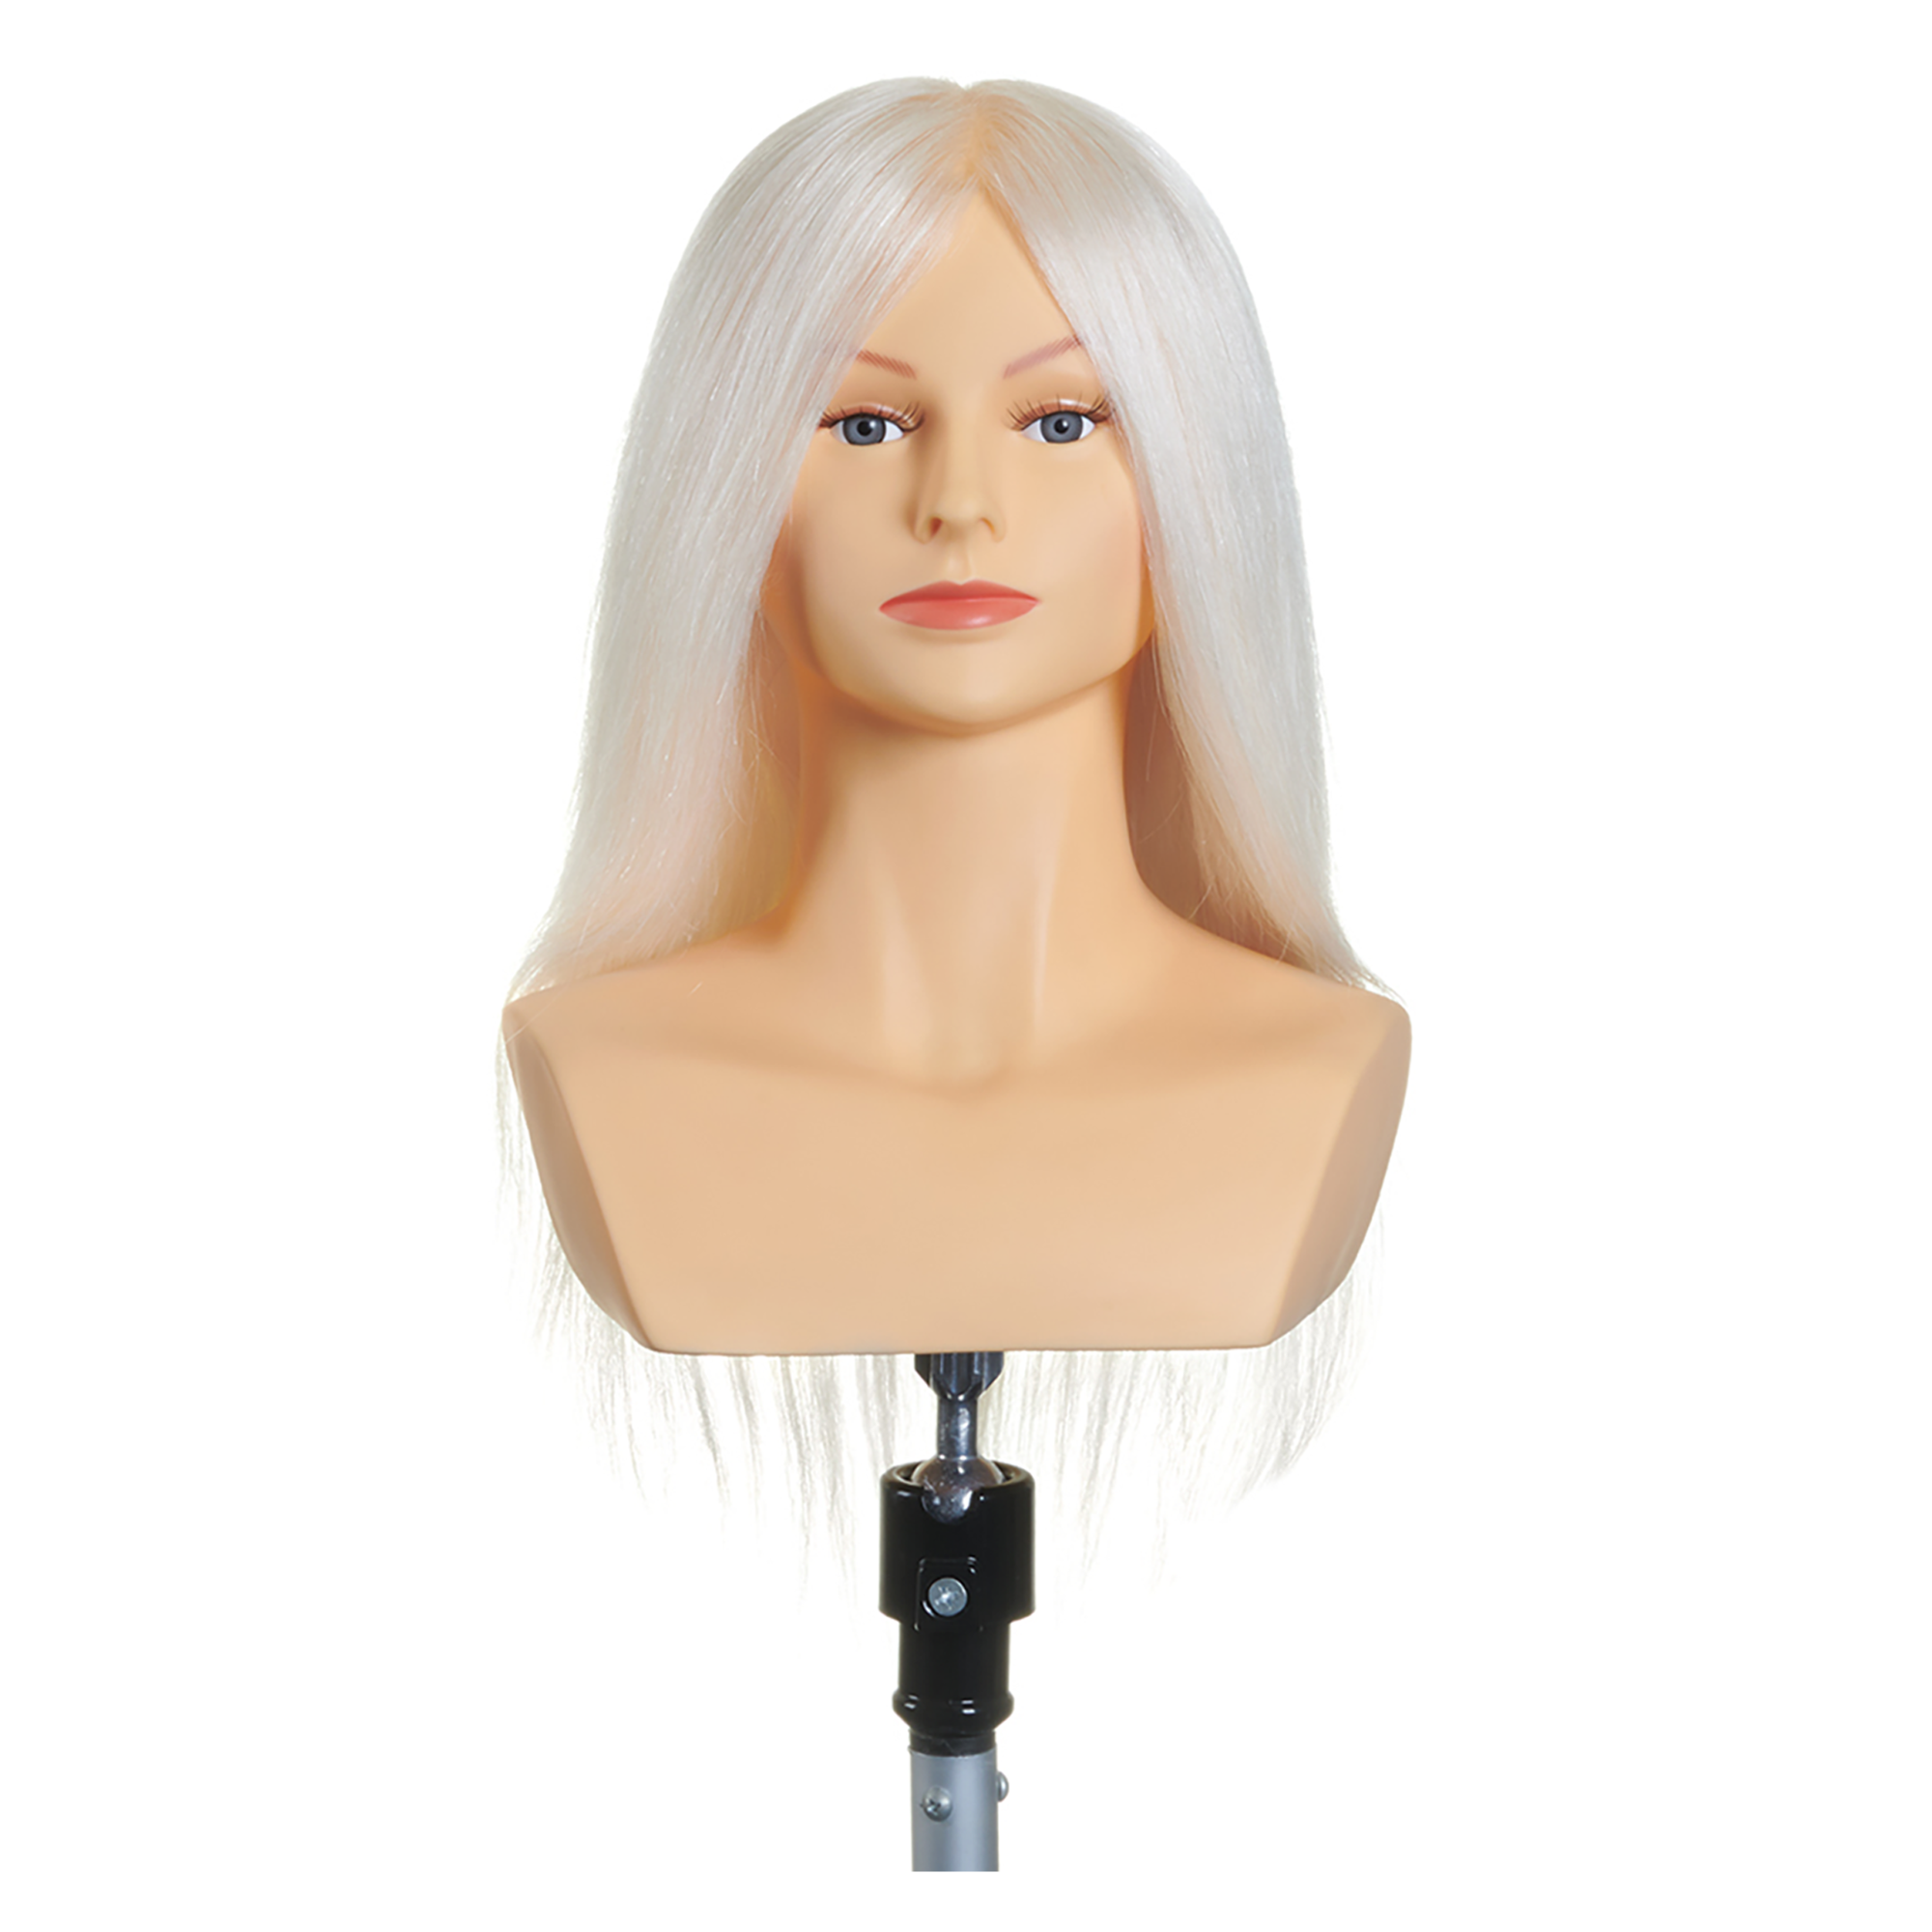 Female Competition Mannequin - 100% Goat Hair 35-40cm.